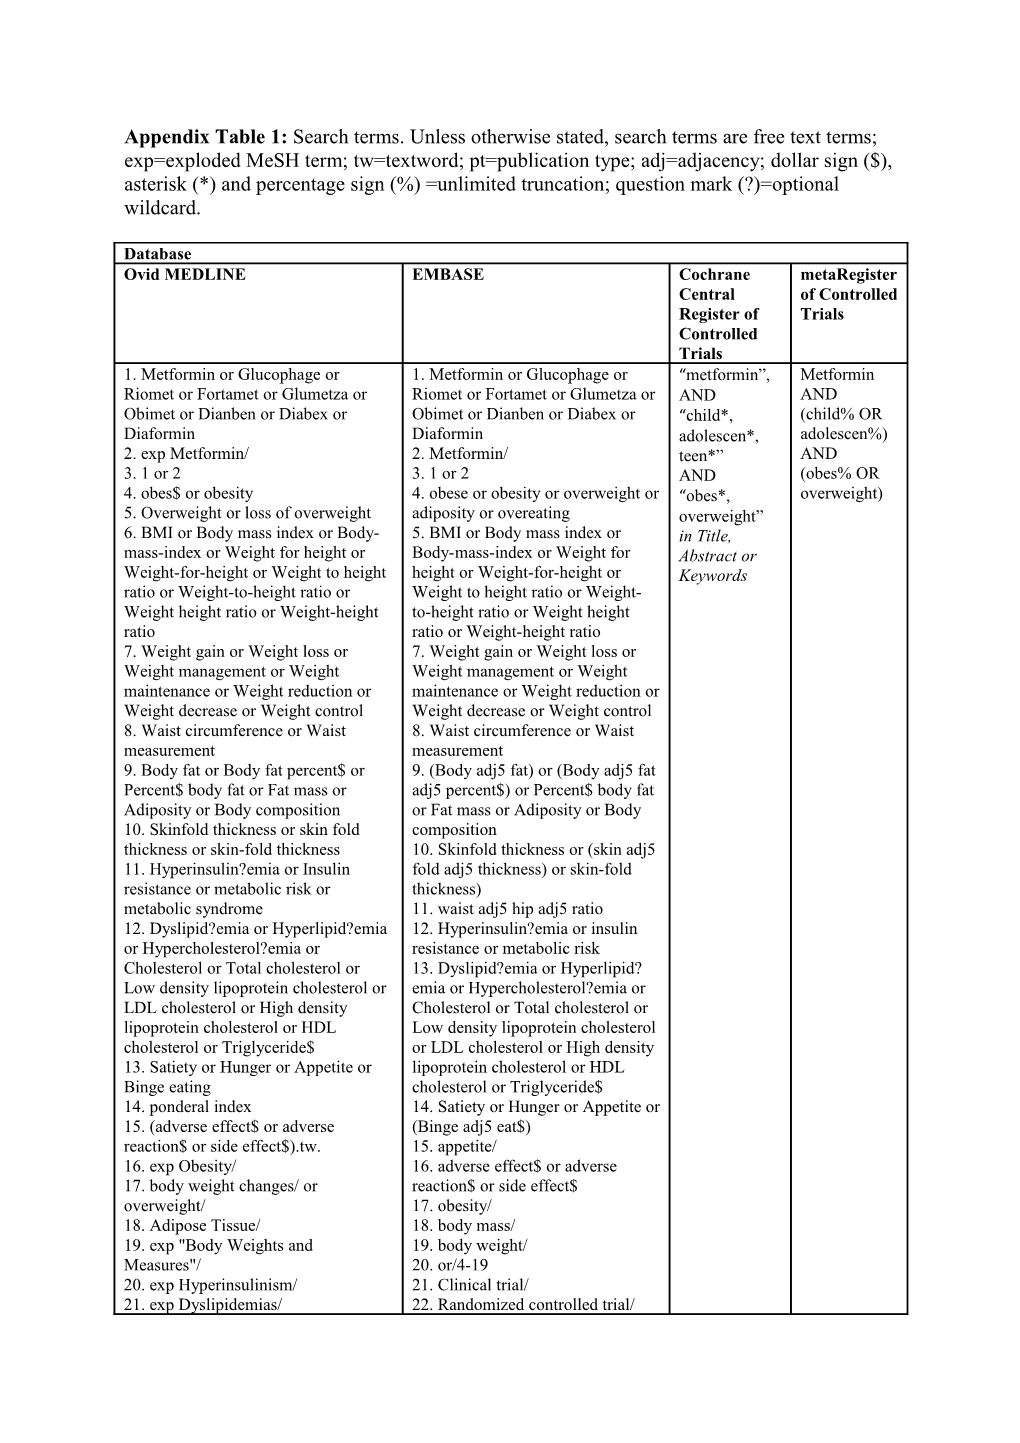 Appendix Table 2 : Table of Excluded Studies